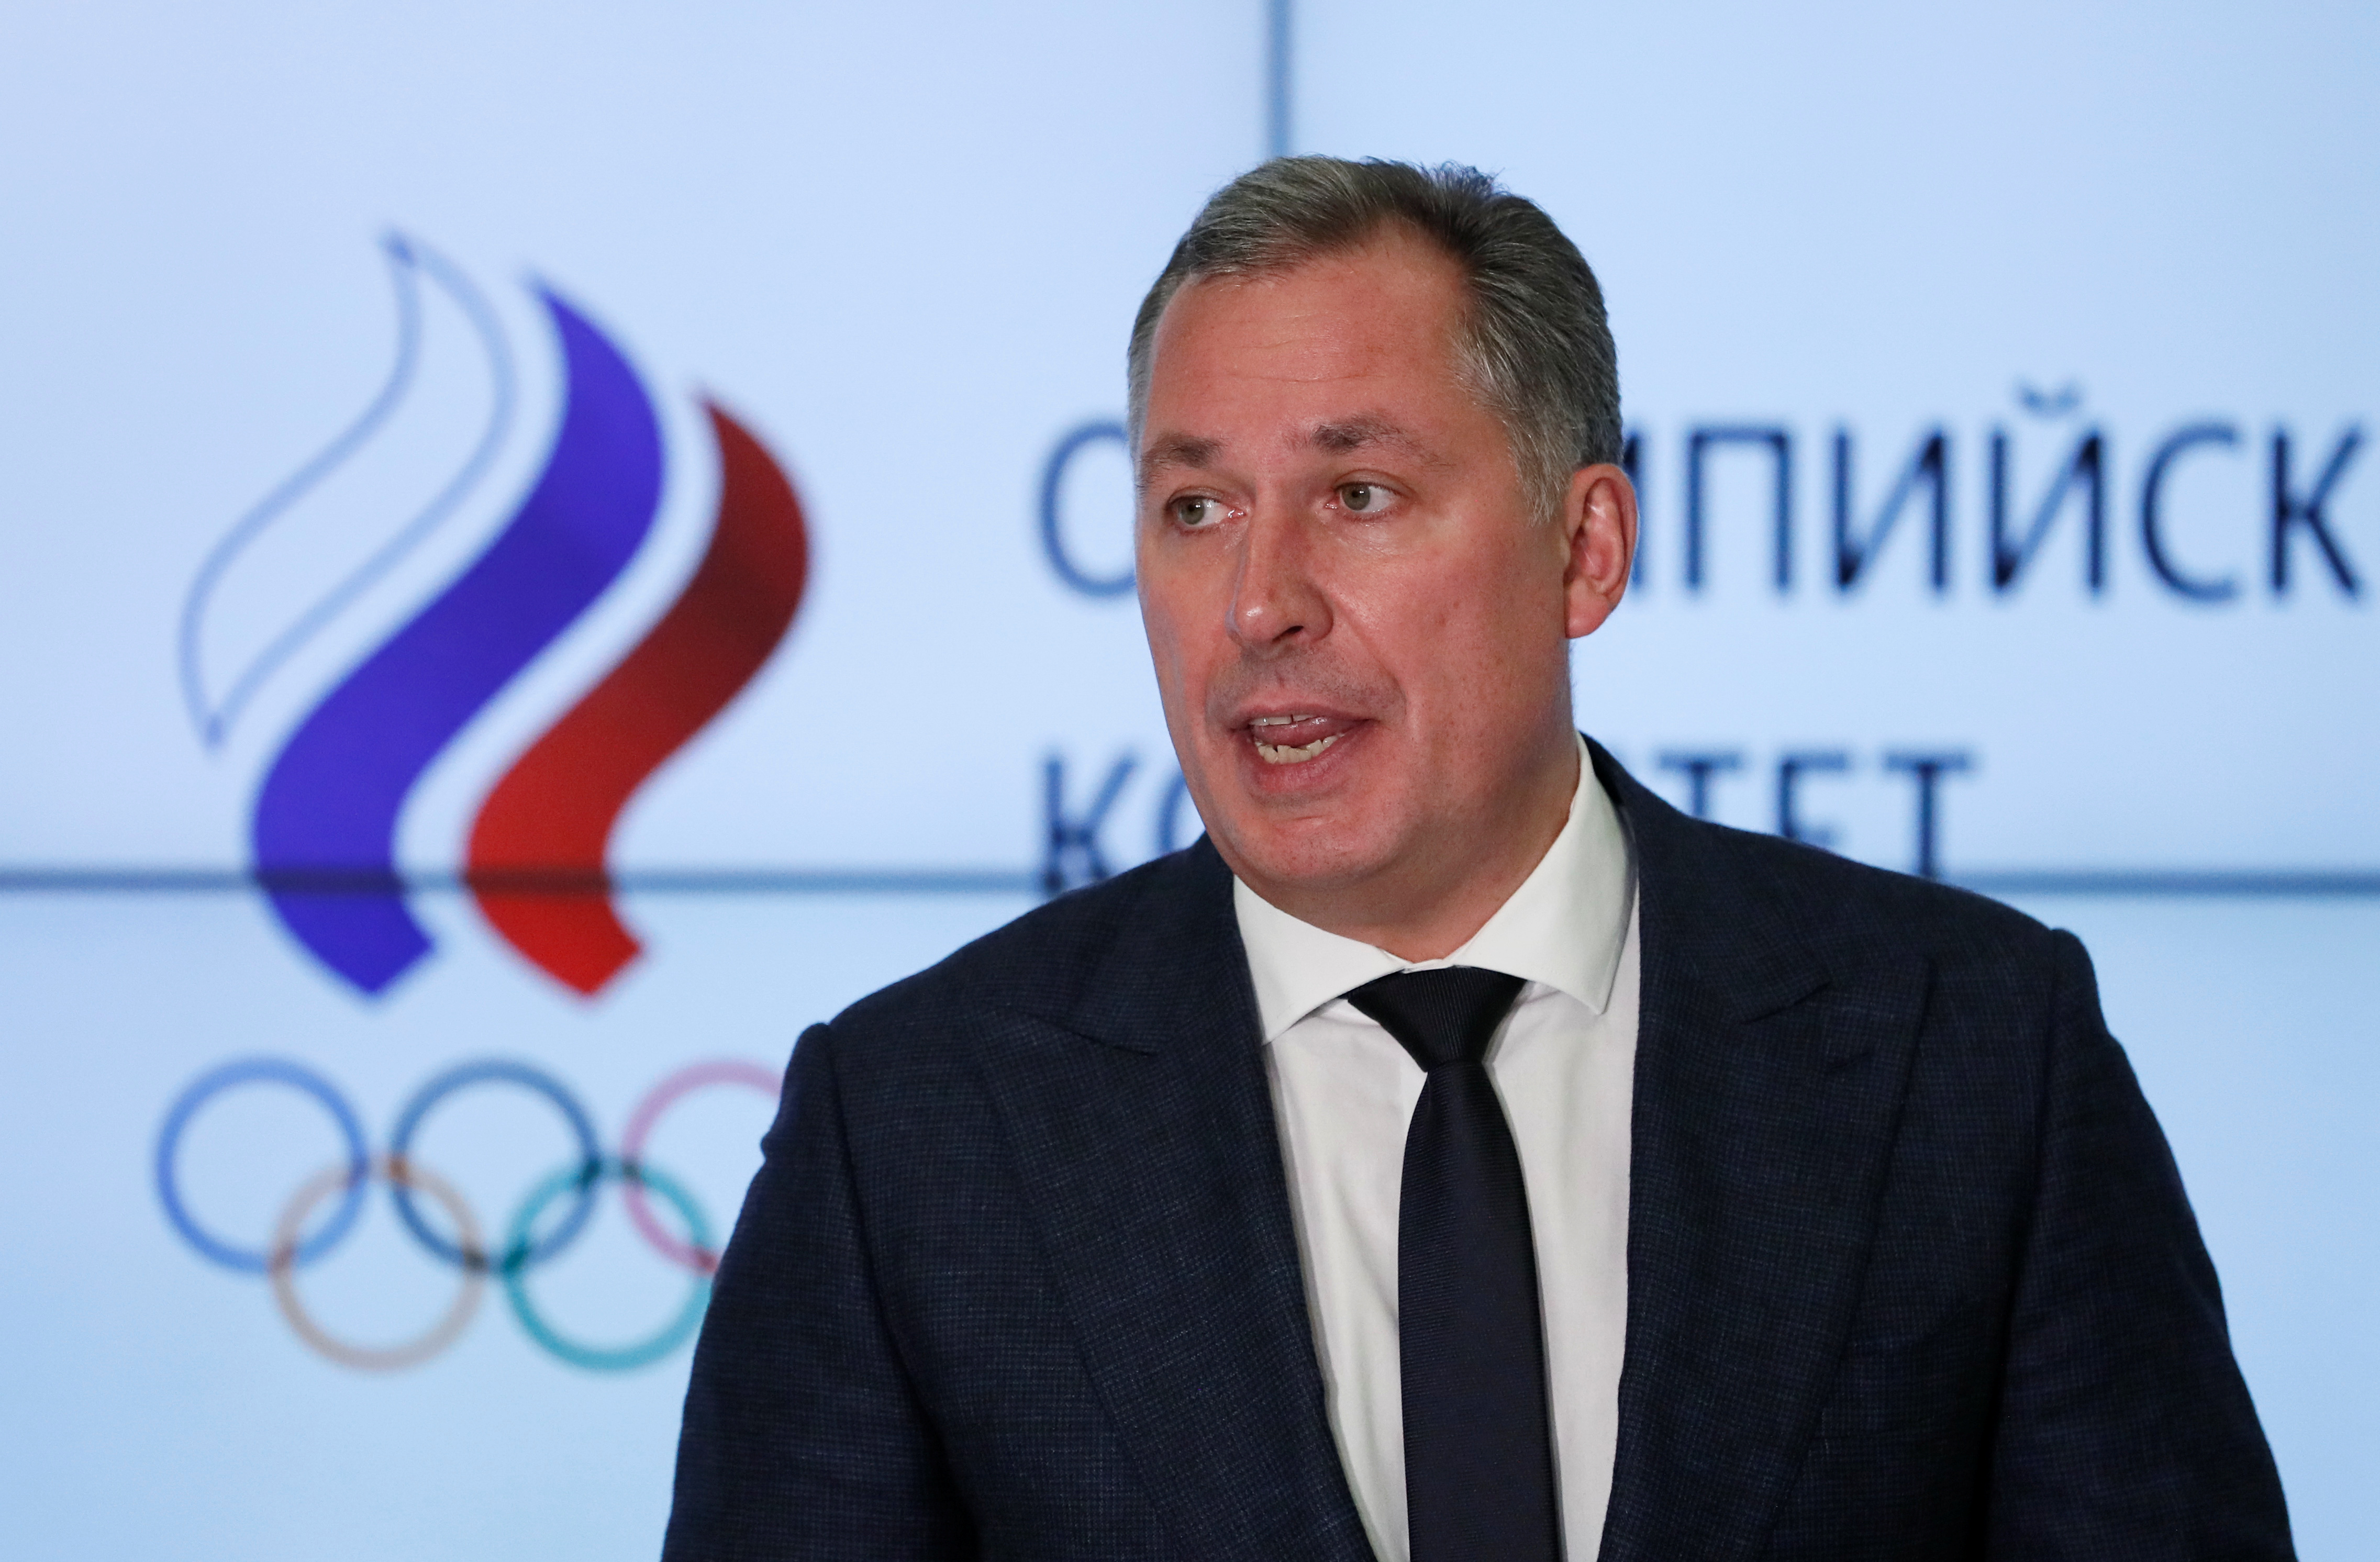 President of the Olympic Committee of Russia Stanislav Pozdnyakov speaks during a news conference in Moscow, Russia December 9, 2019. REUTERS/Shamil Zhumatov